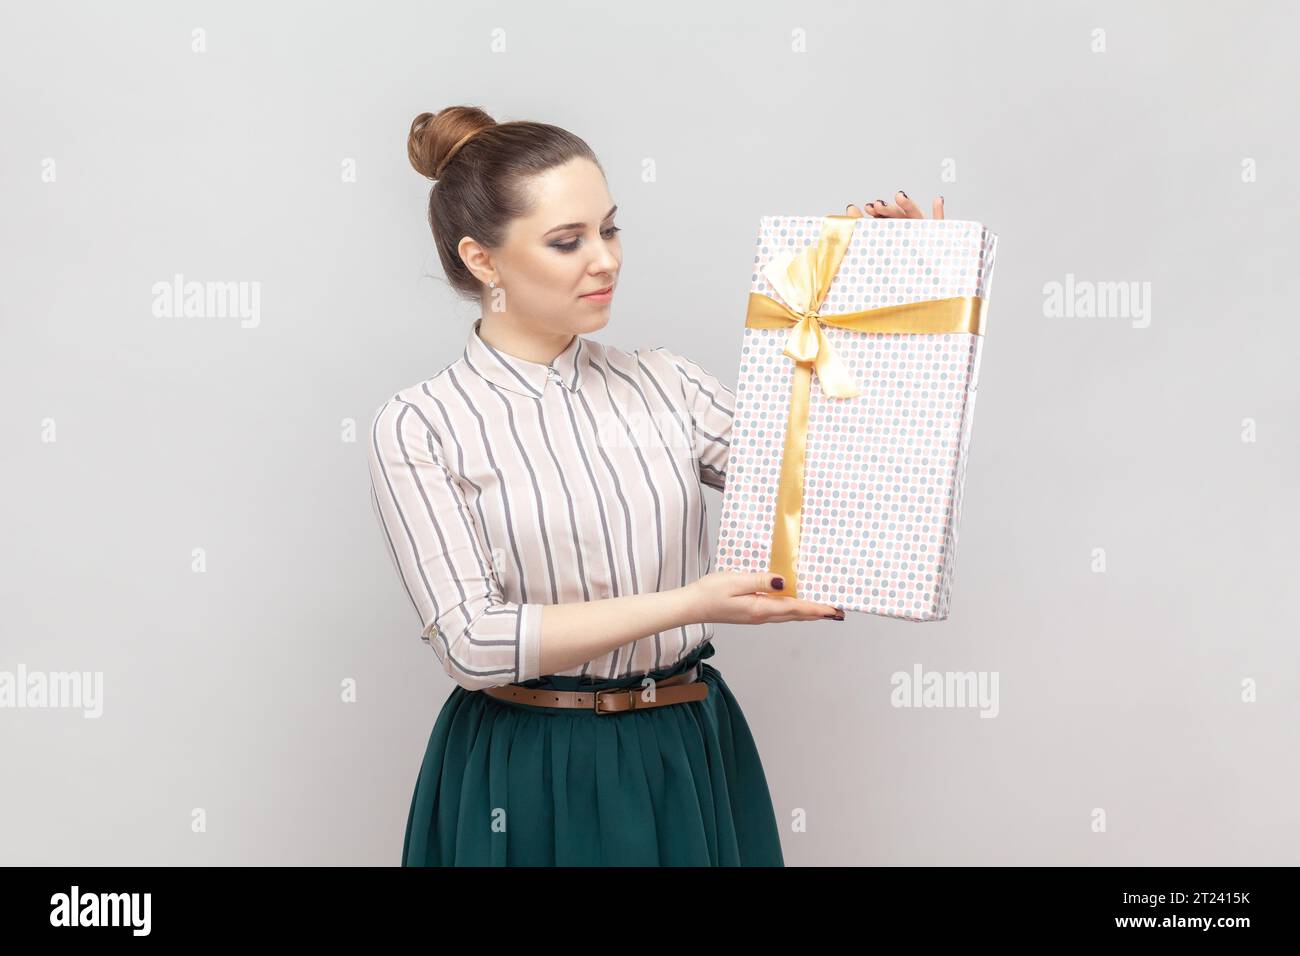 Portrait of young adult beautiful woman wearing striped shirt and green skirt standing showing wrapped present box, congratulating with holiday. Indoor studio shot isolated on gray background. Stock Photo